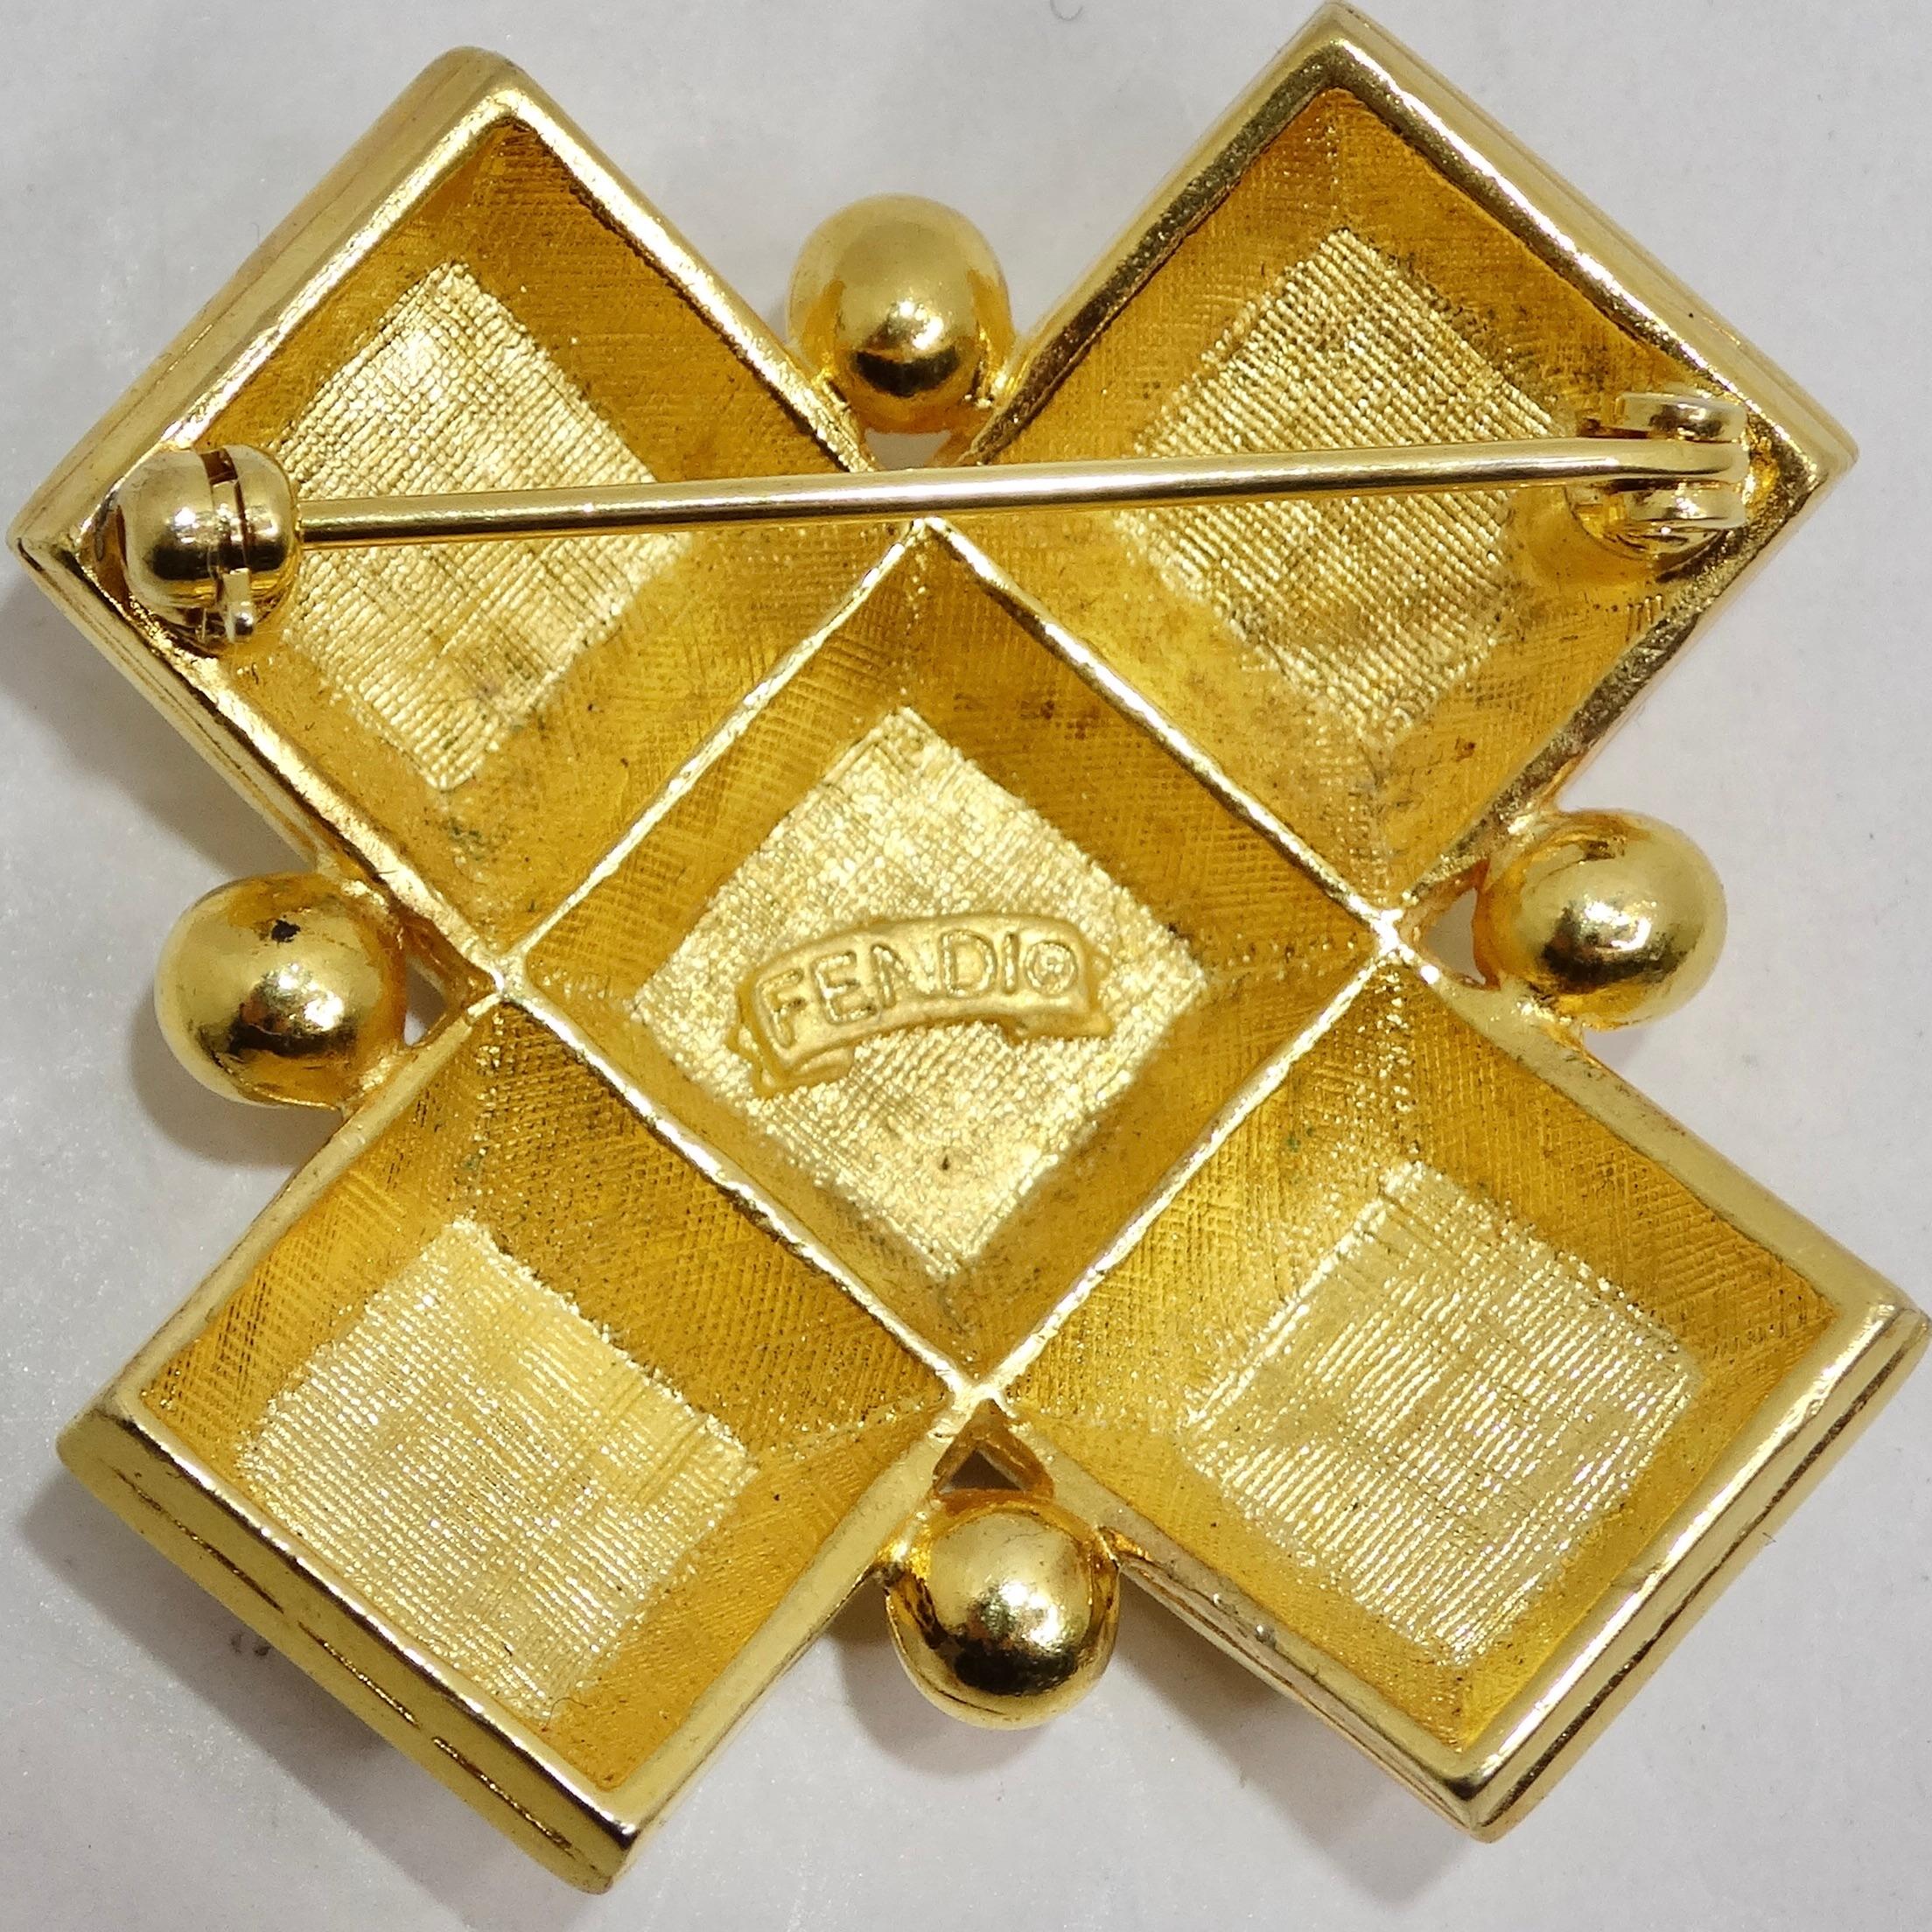 Fendi 1980s Gold Plated FF Large Brooch 1